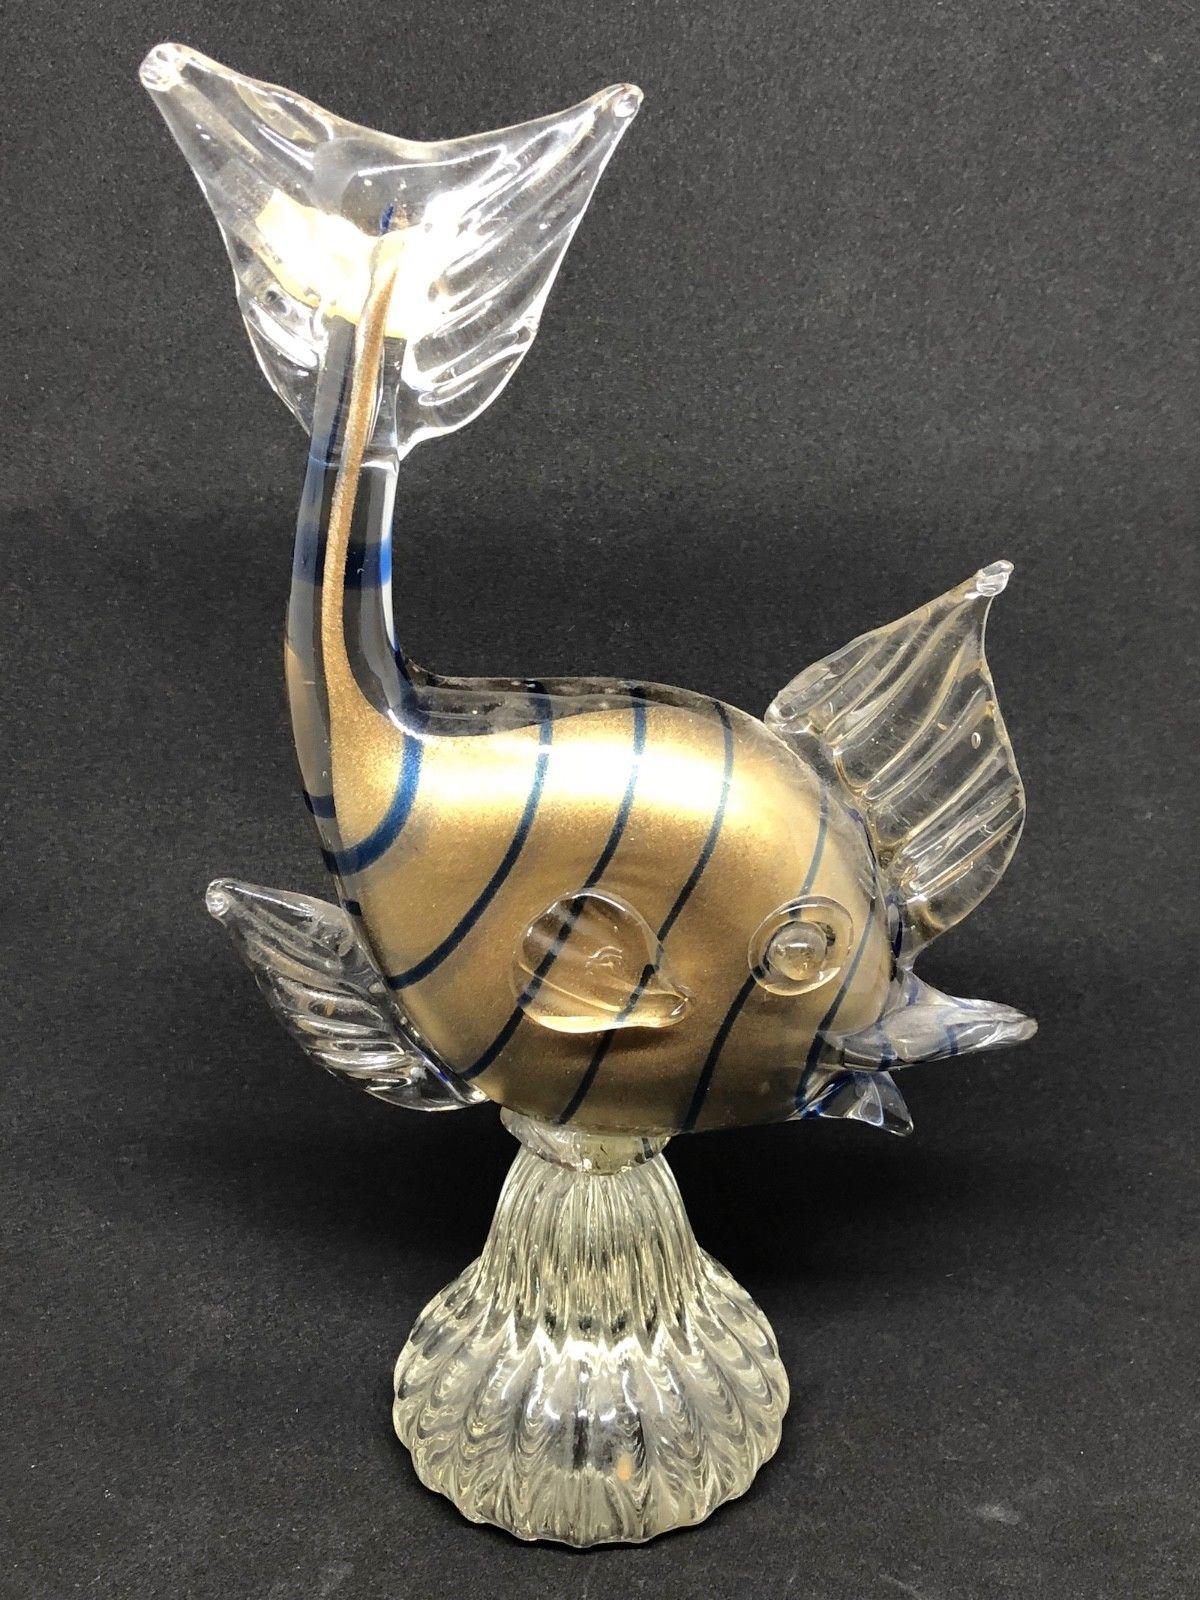 Gorgeous handblown Murano art glass fish statue. A beautiful decorative item in clear glass with gold inside and blue strips. Made in Murano, Italy, 1960s.